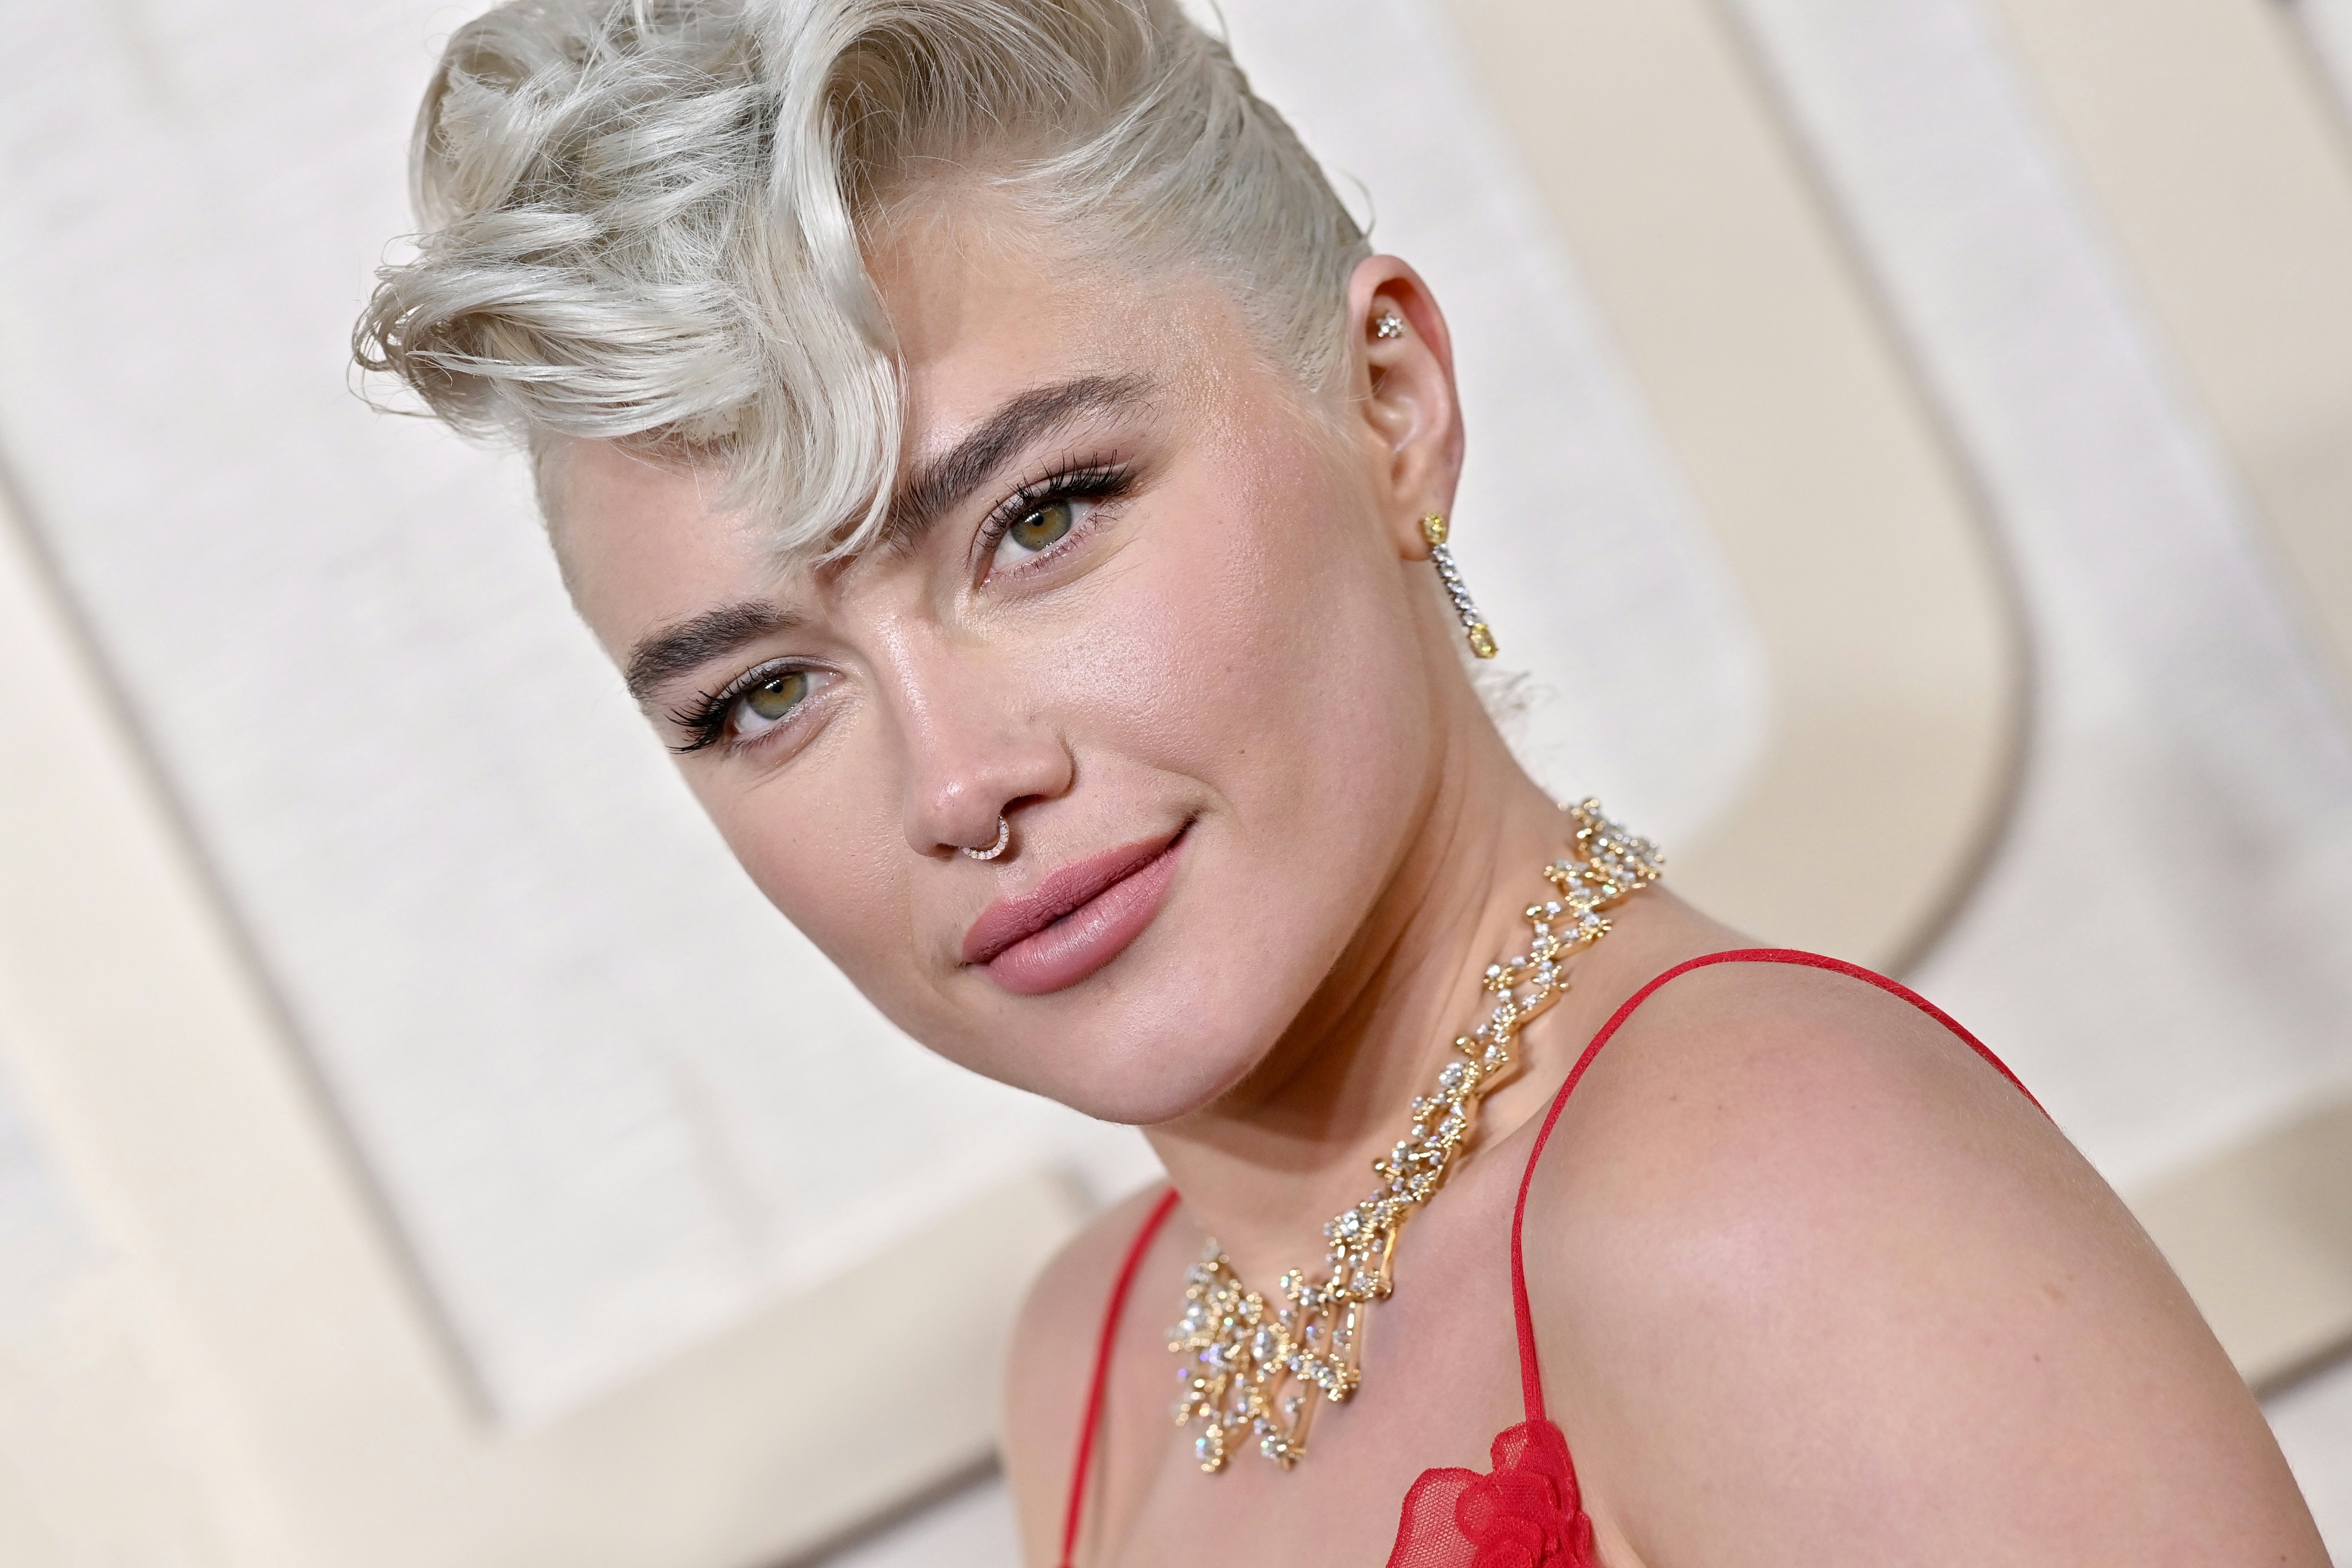 Florence Pugh's topless scene in Oppenheimer is censored in Middle